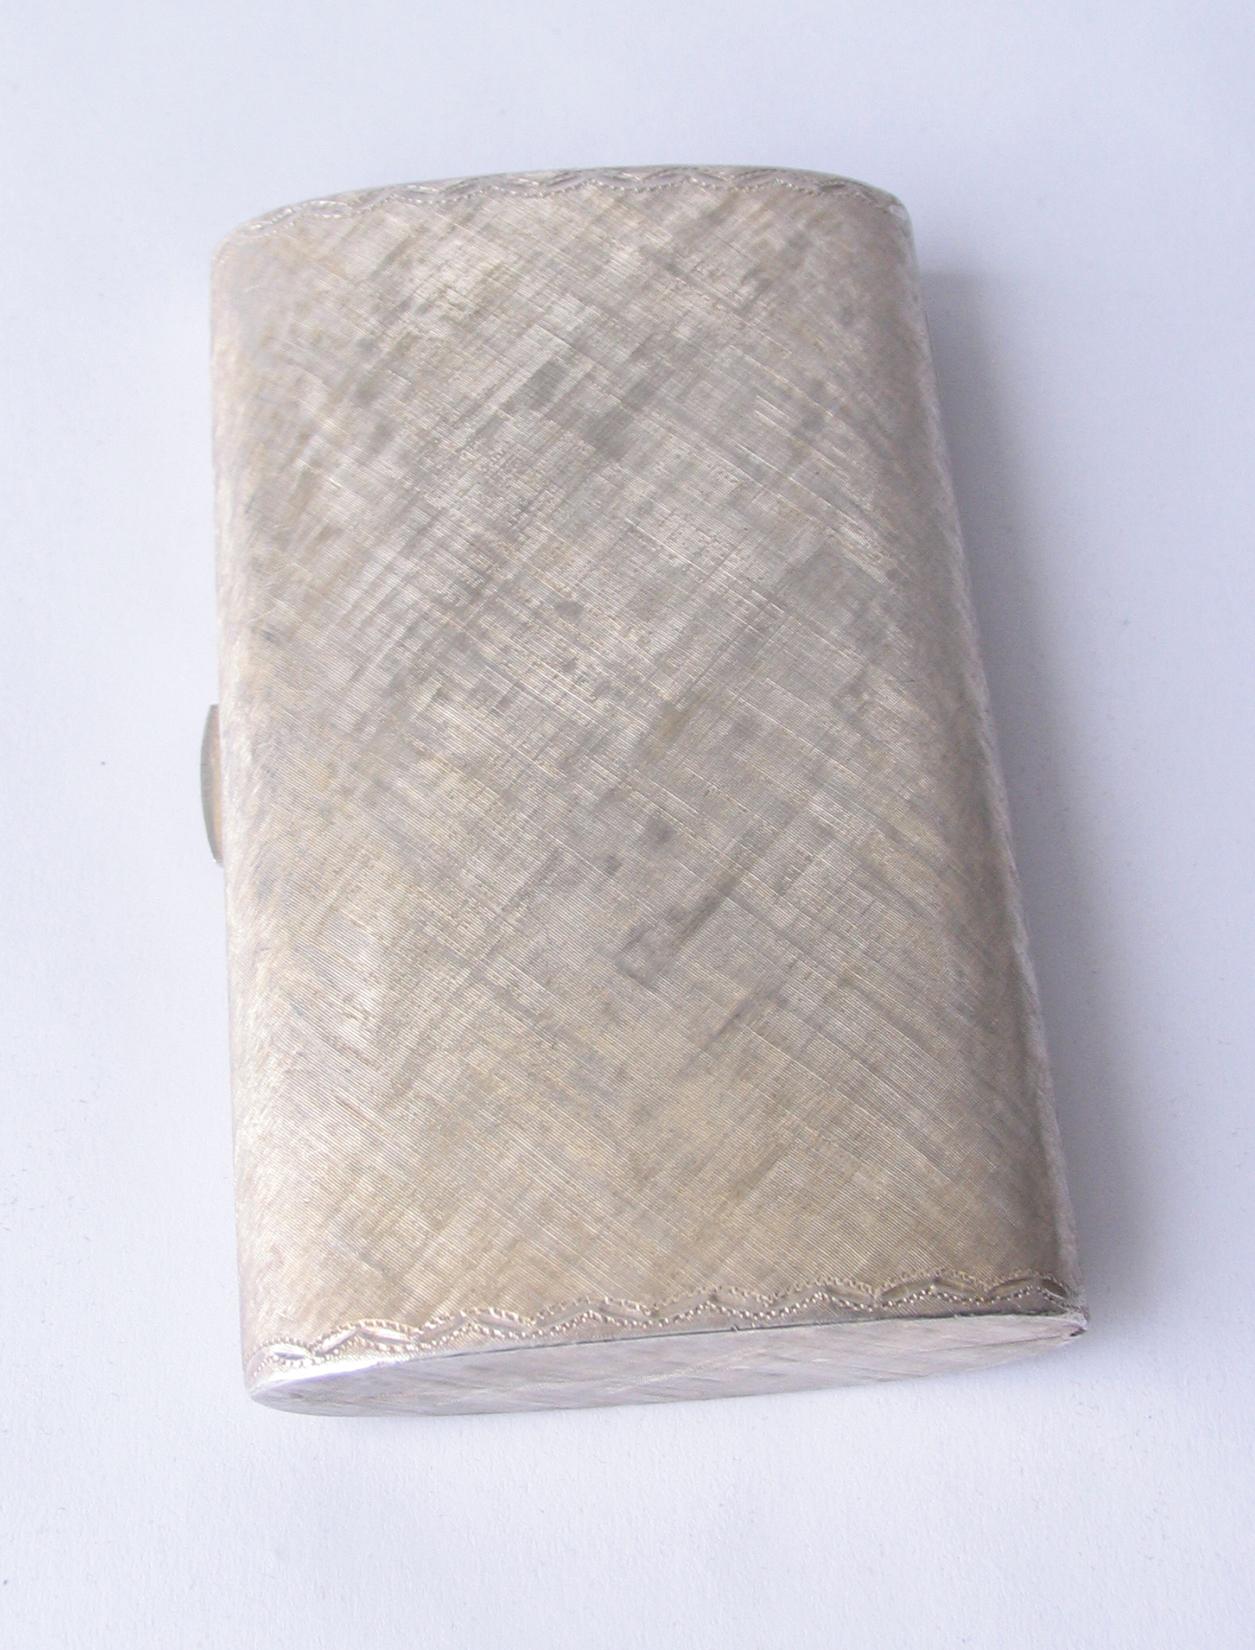 Metalwork 1950s Sterling Silver Cigarette Card Case Made in Italy for Bonwit Teller & Co.